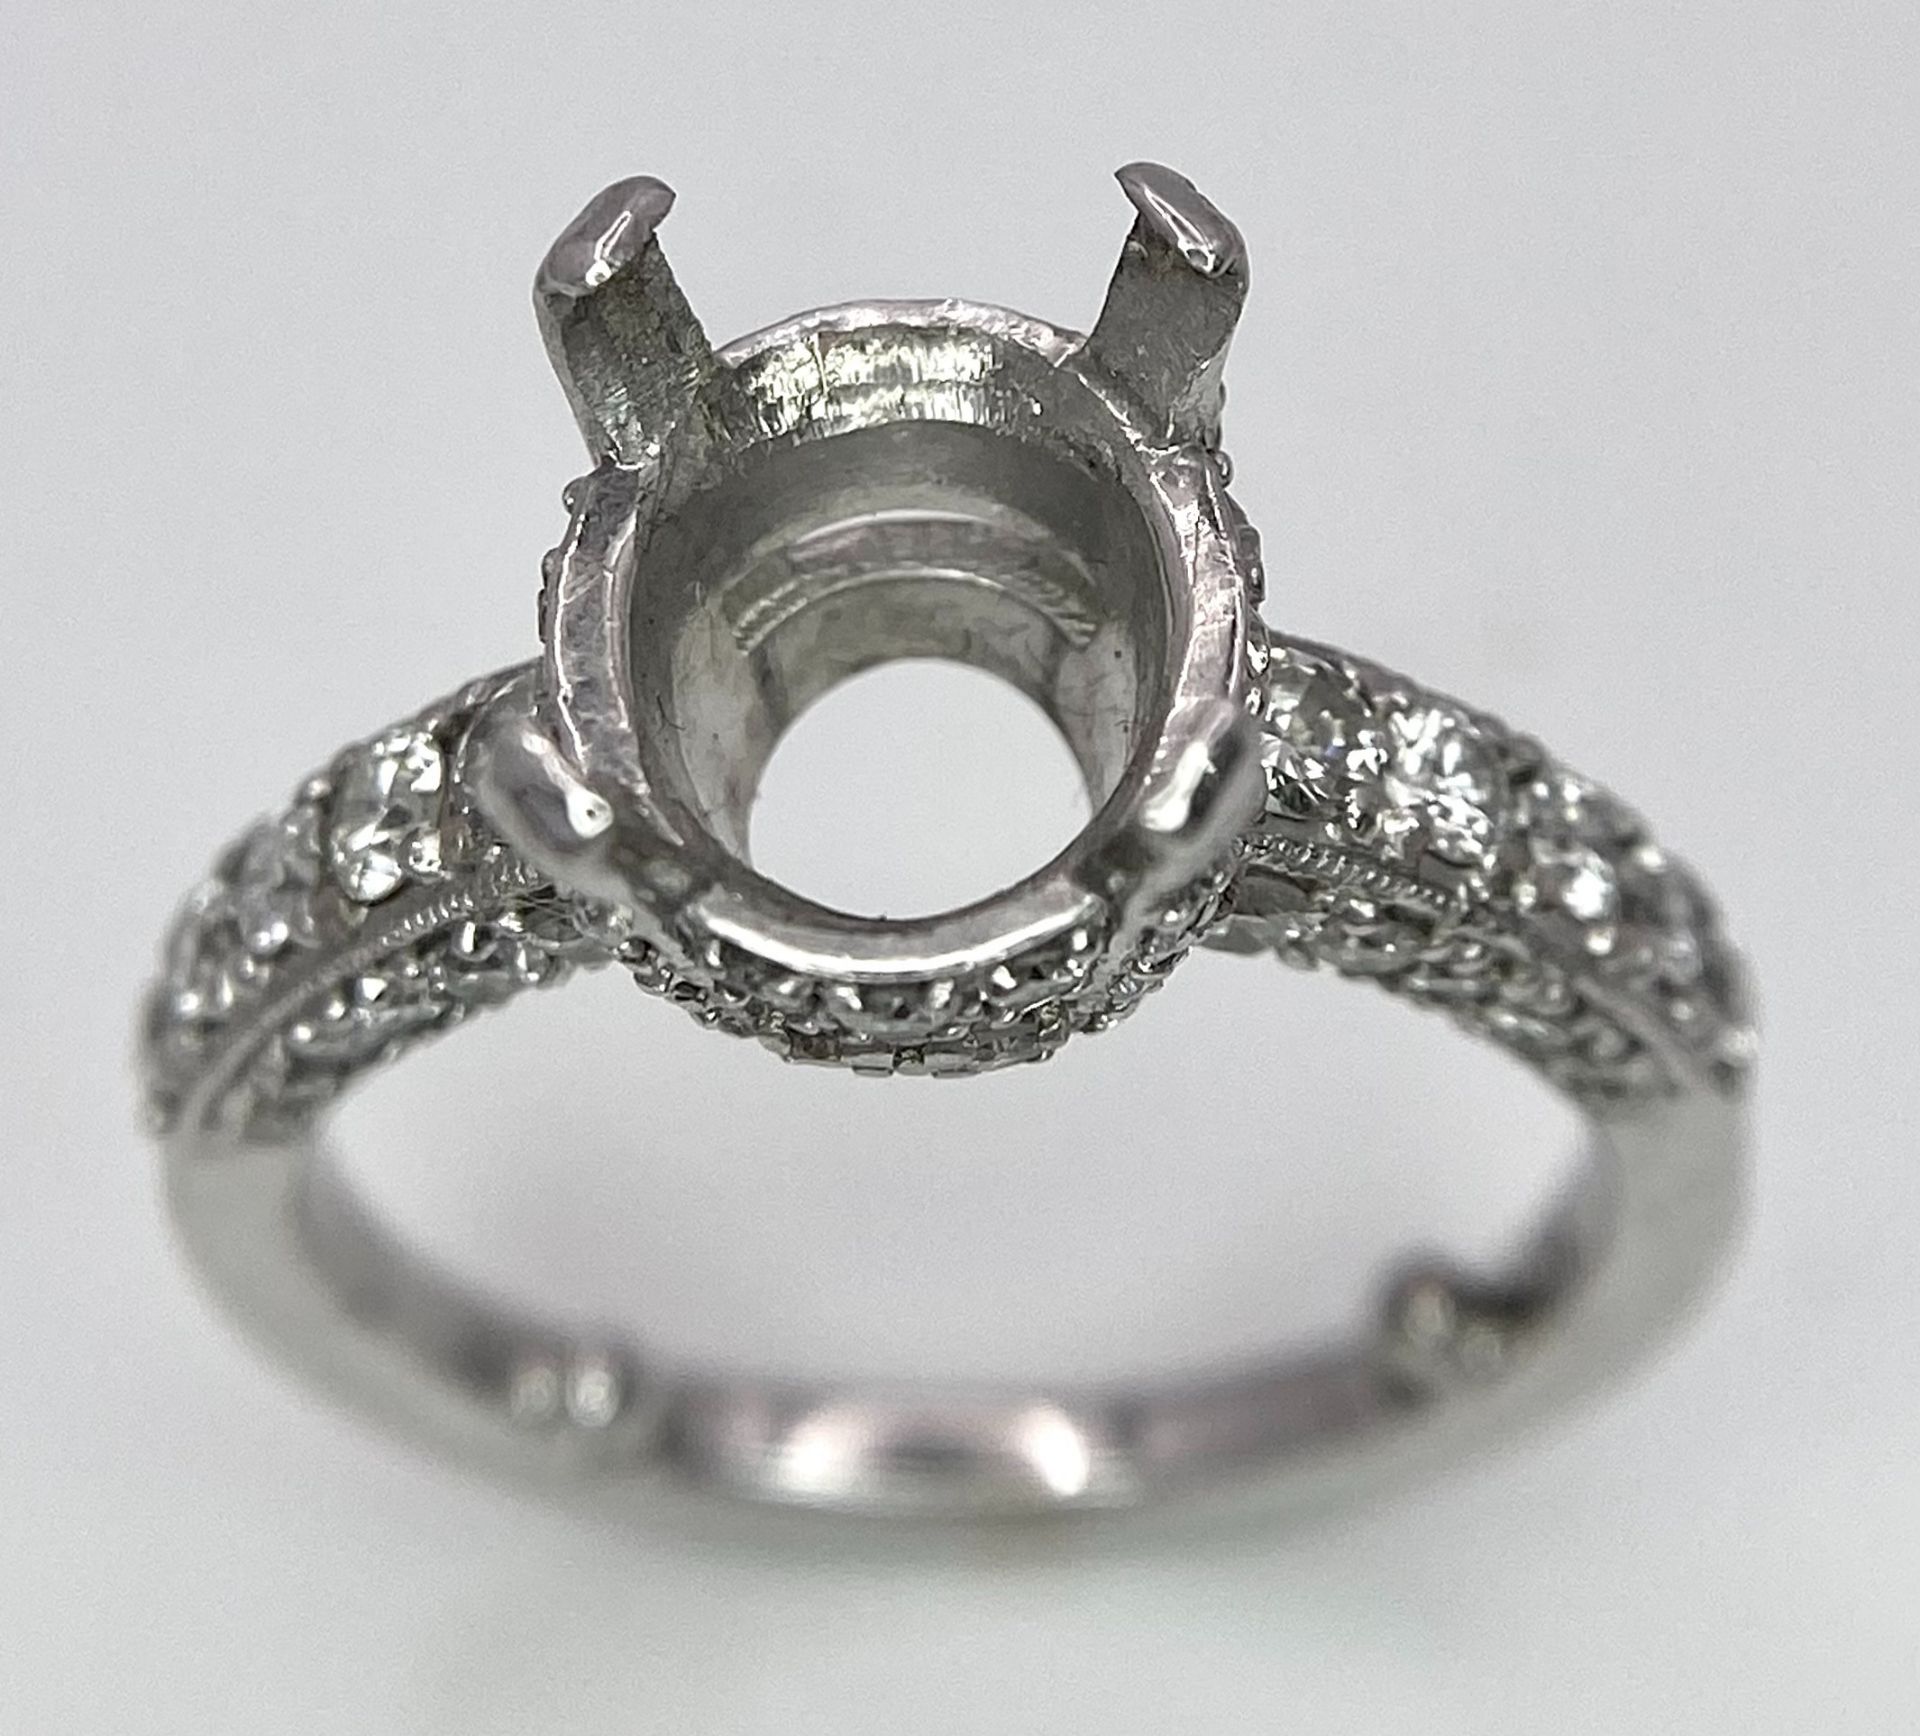 AN 18K WHITE GOLD 4 CLAW SINGLE STONE RING WITH DIAMOND SET BEZEL, SHOULDERS AND SIDES - Ready to - Image 3 of 6